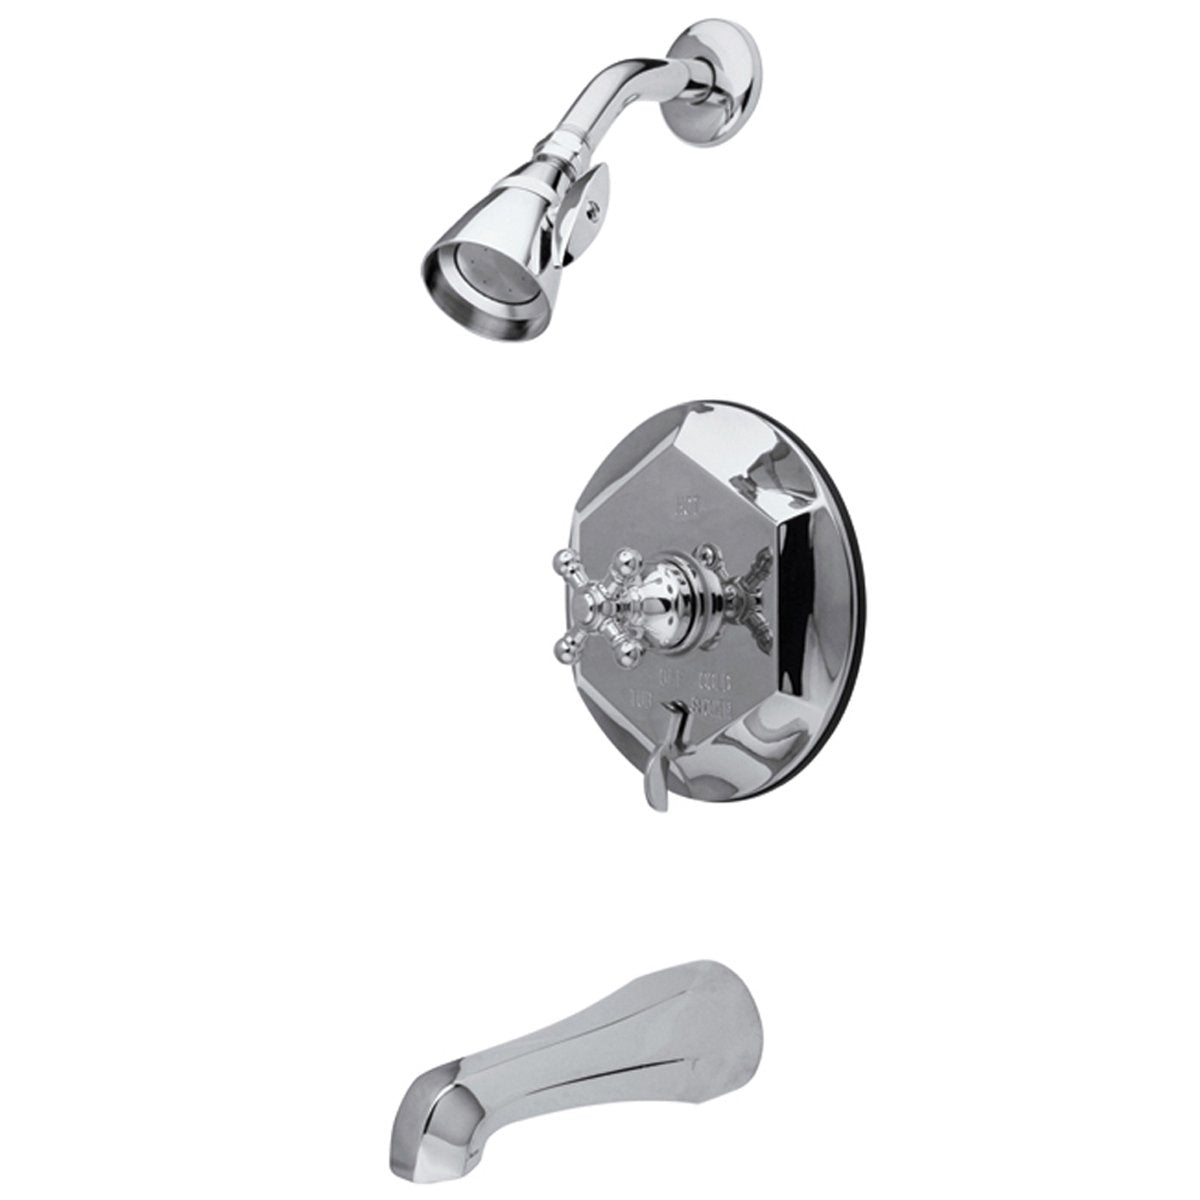 Kingston Brass Single Handle Tub and Shower Faucet in Polished Chrome-Shower Faucets-Free Shipping-Directsinks.